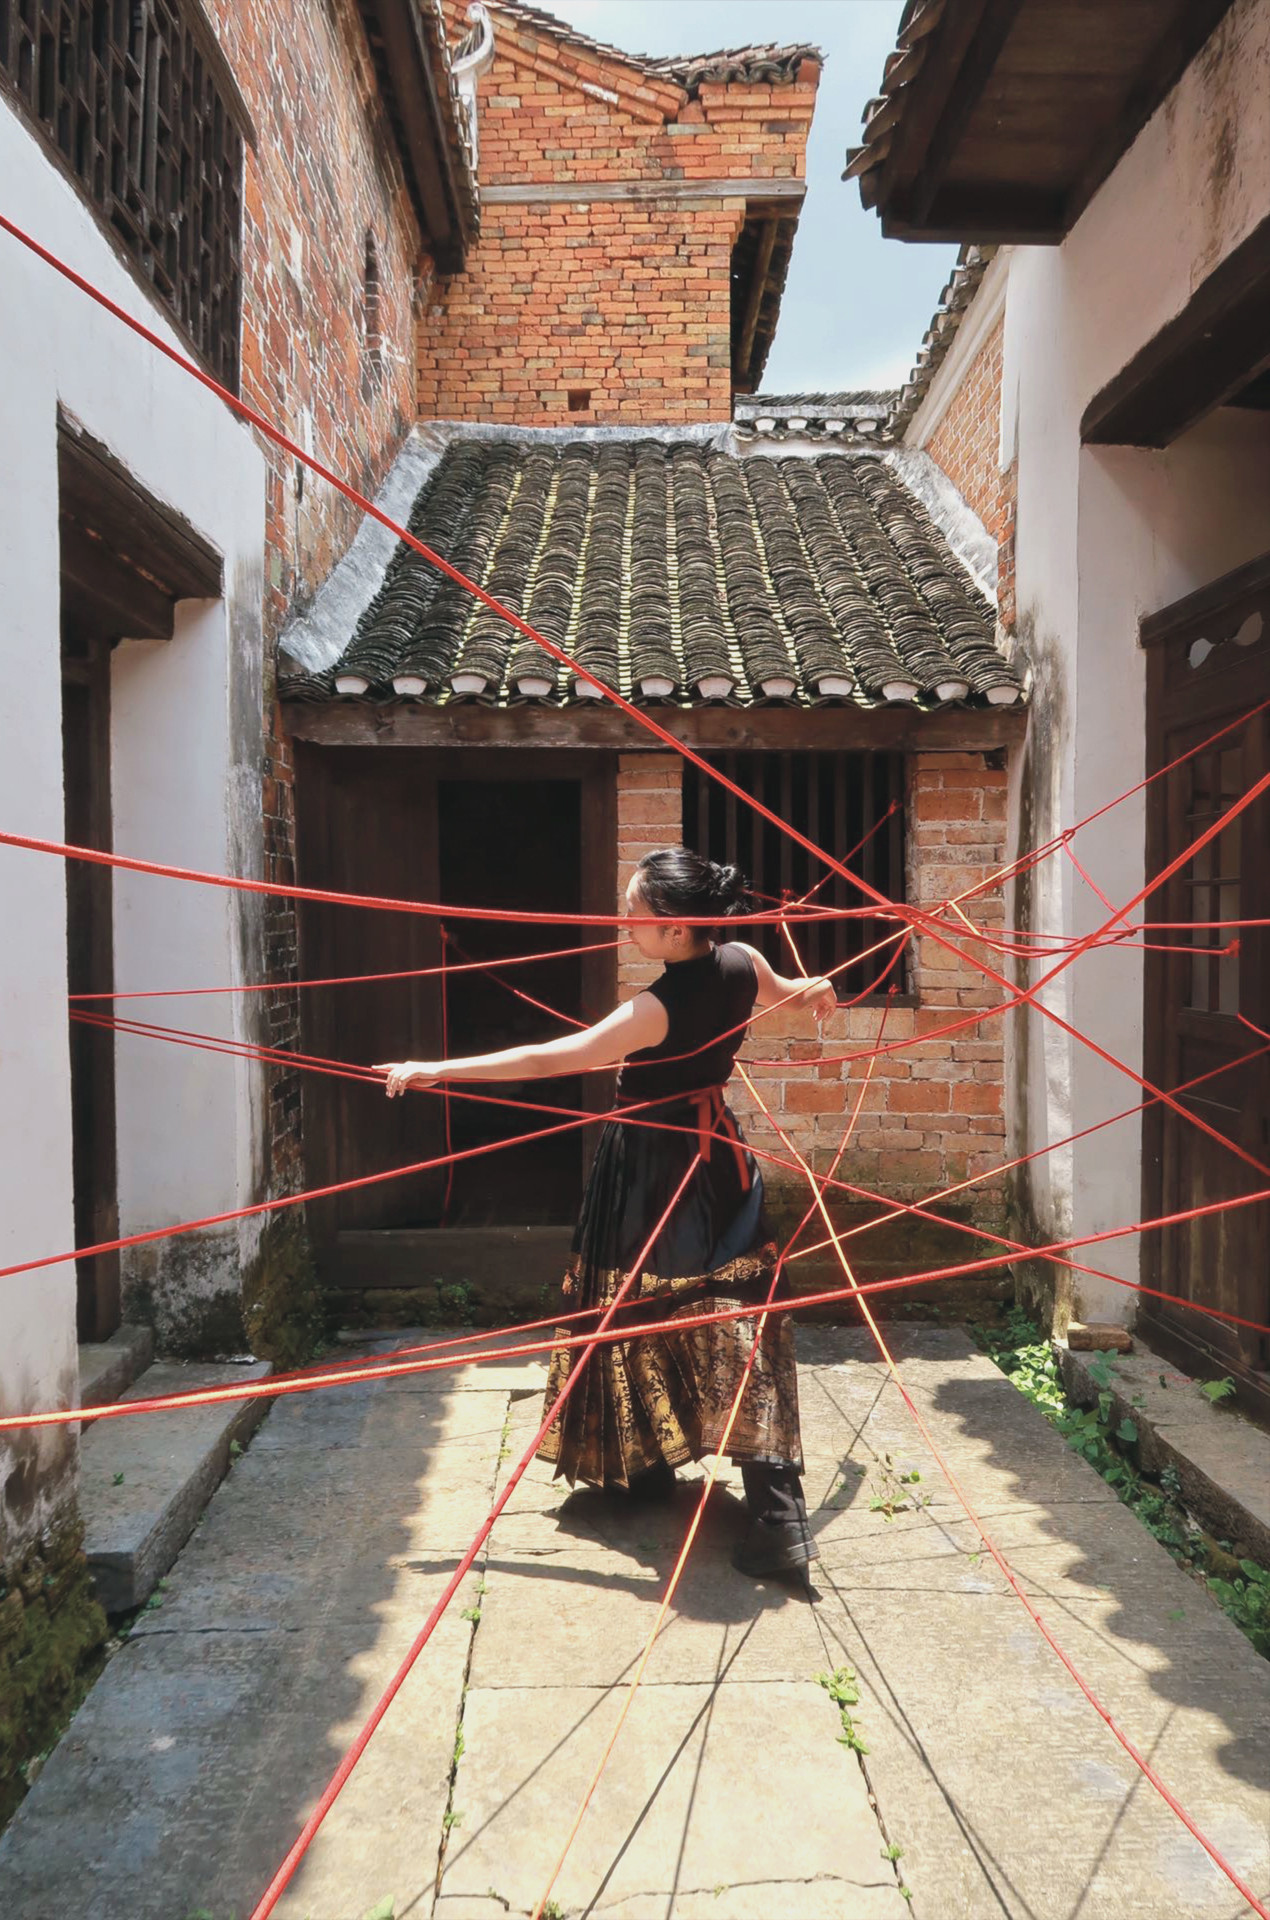 Woman caught in mesh of red threads dancing in small courtyard